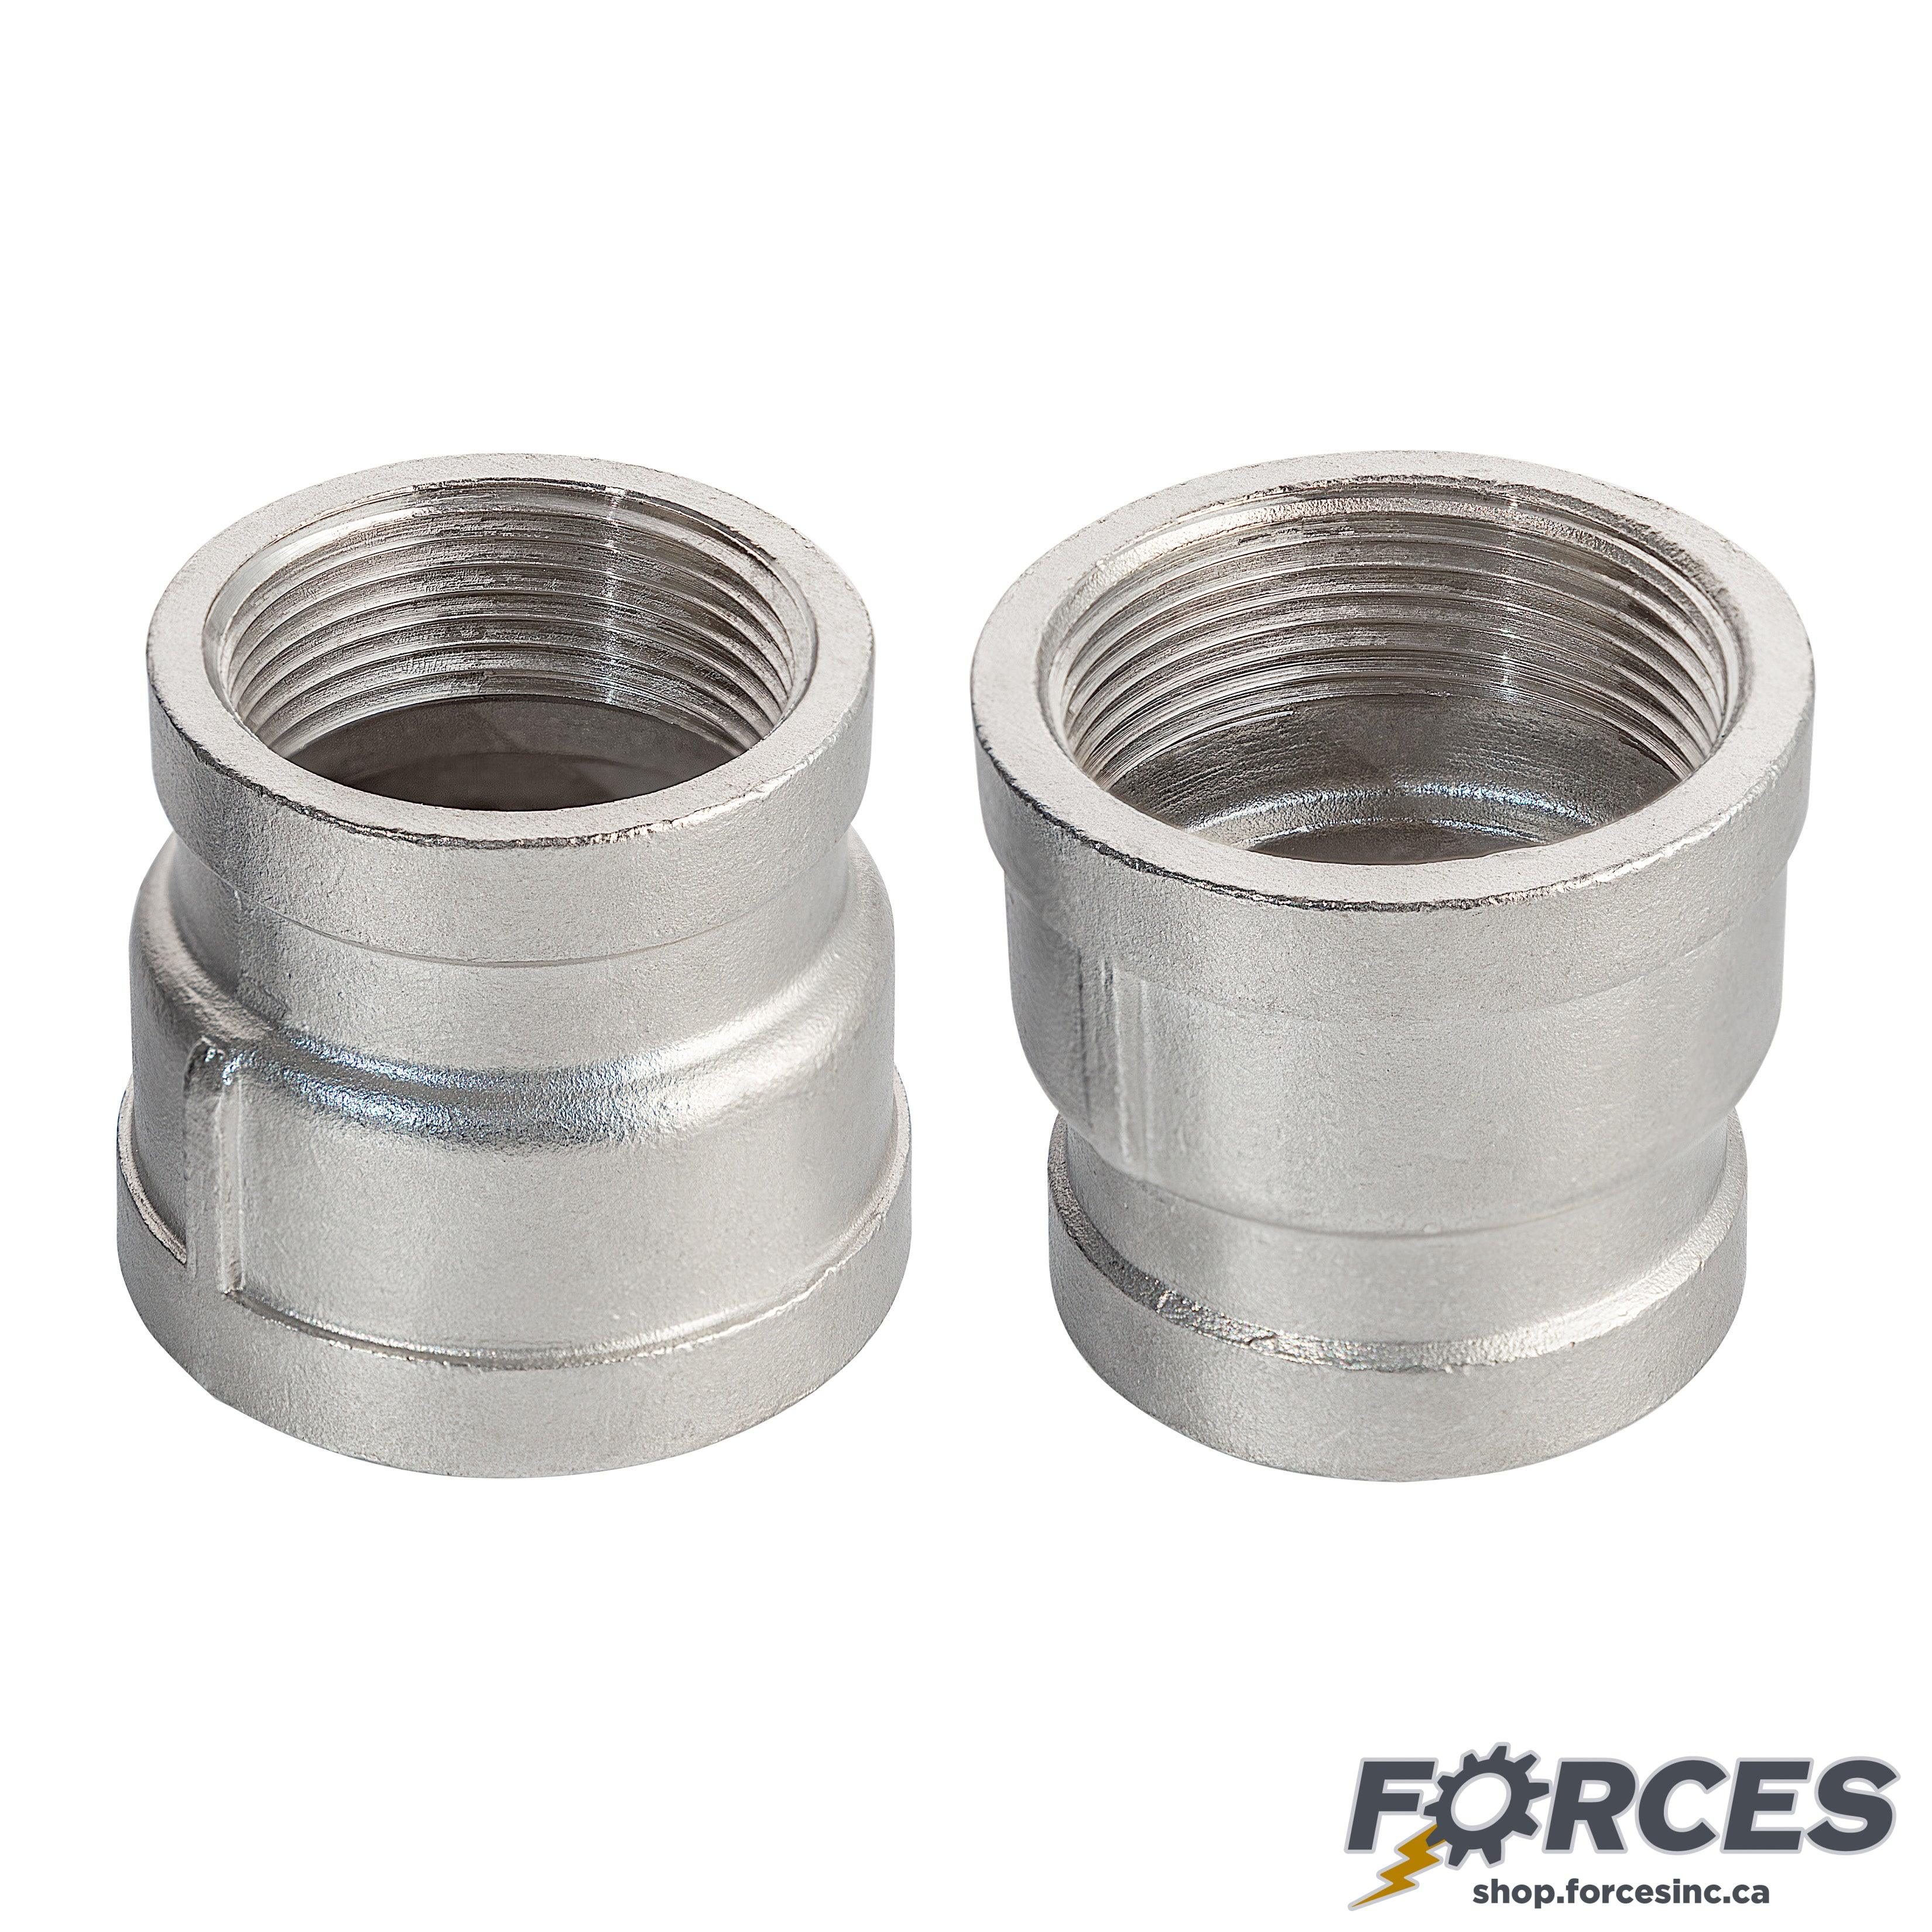 2-1/2" x 2" Coupling Reducer NPT #150 - Stainless Steel 316 - Forces Inc